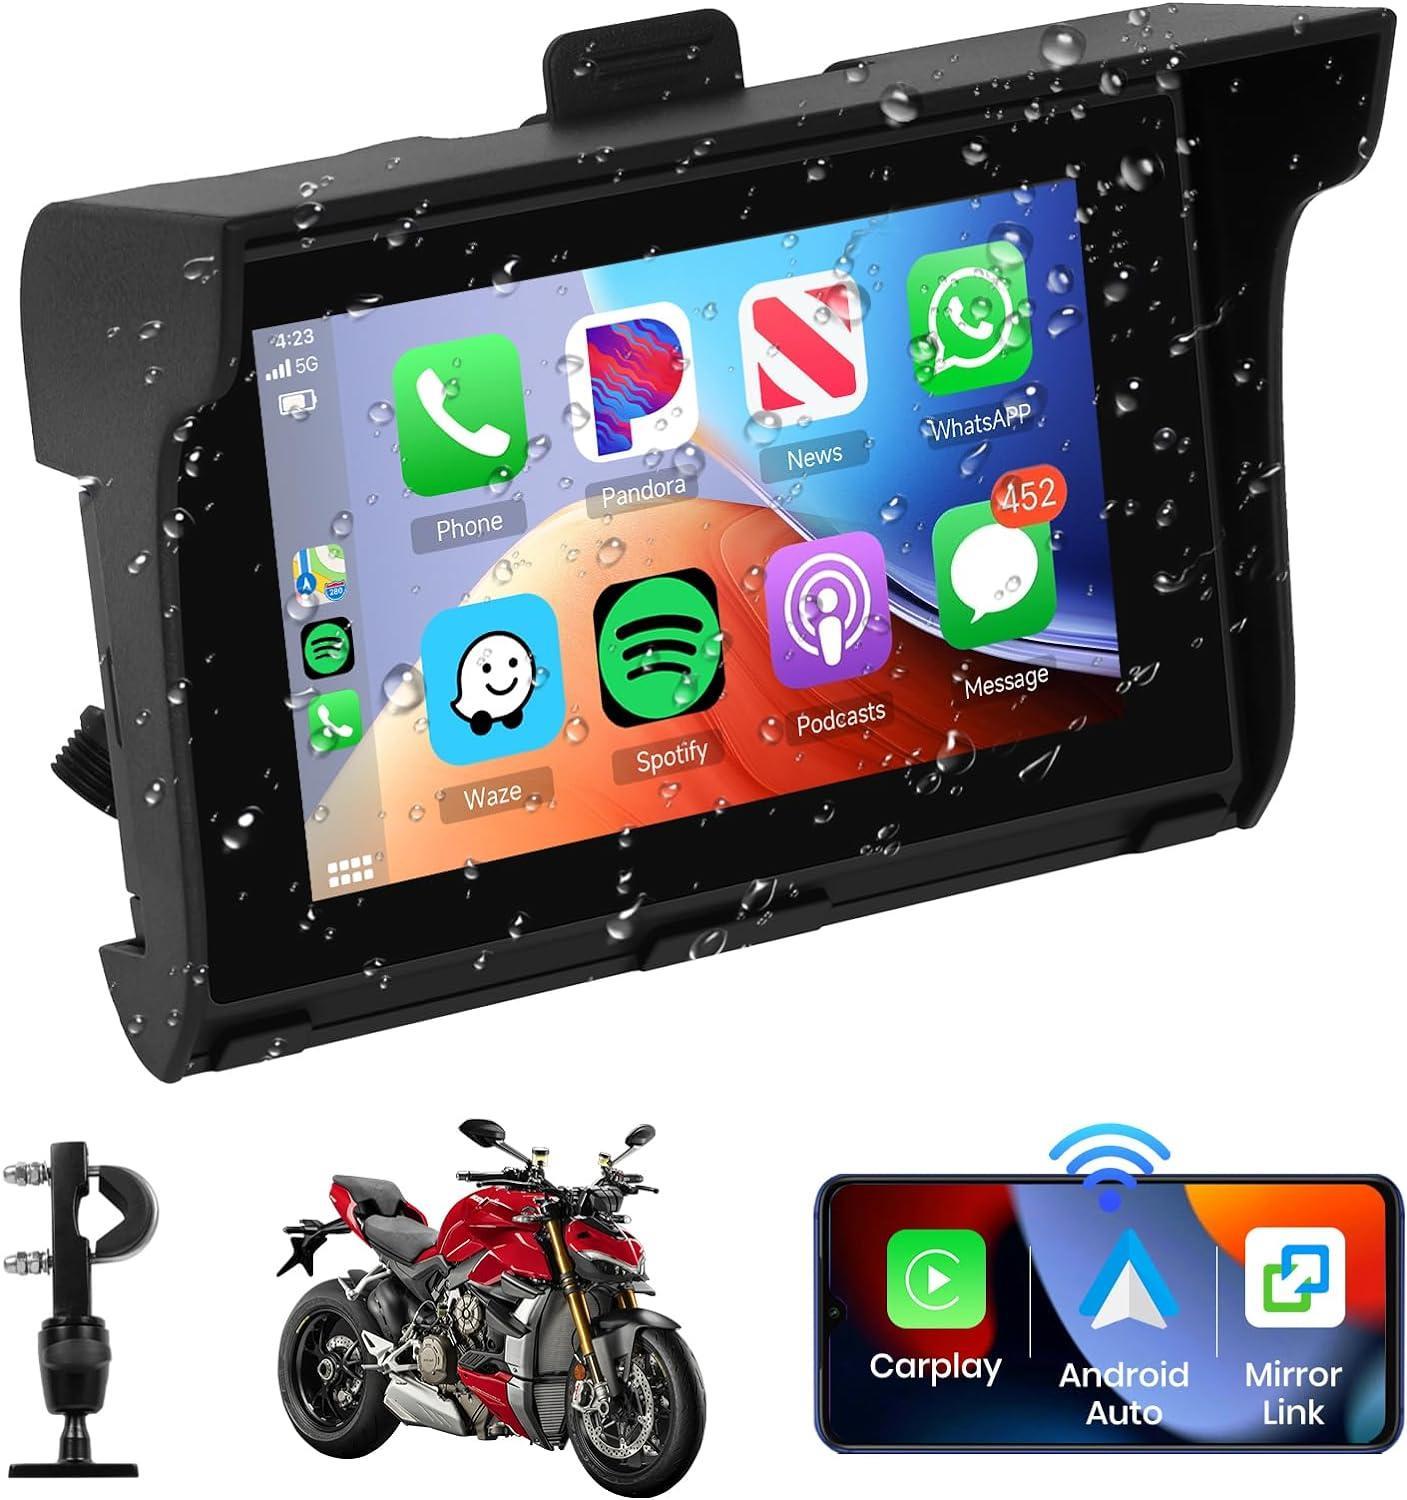 Portable Screen for Motorcycle Wireless Apple CarPlay & Android Car Navigator GPS Navigation 5 Inch HD Waterproof Touchscreen Motorcycle Bluetooth Mirror Link EQ, USB/TF Display for Motorcycle